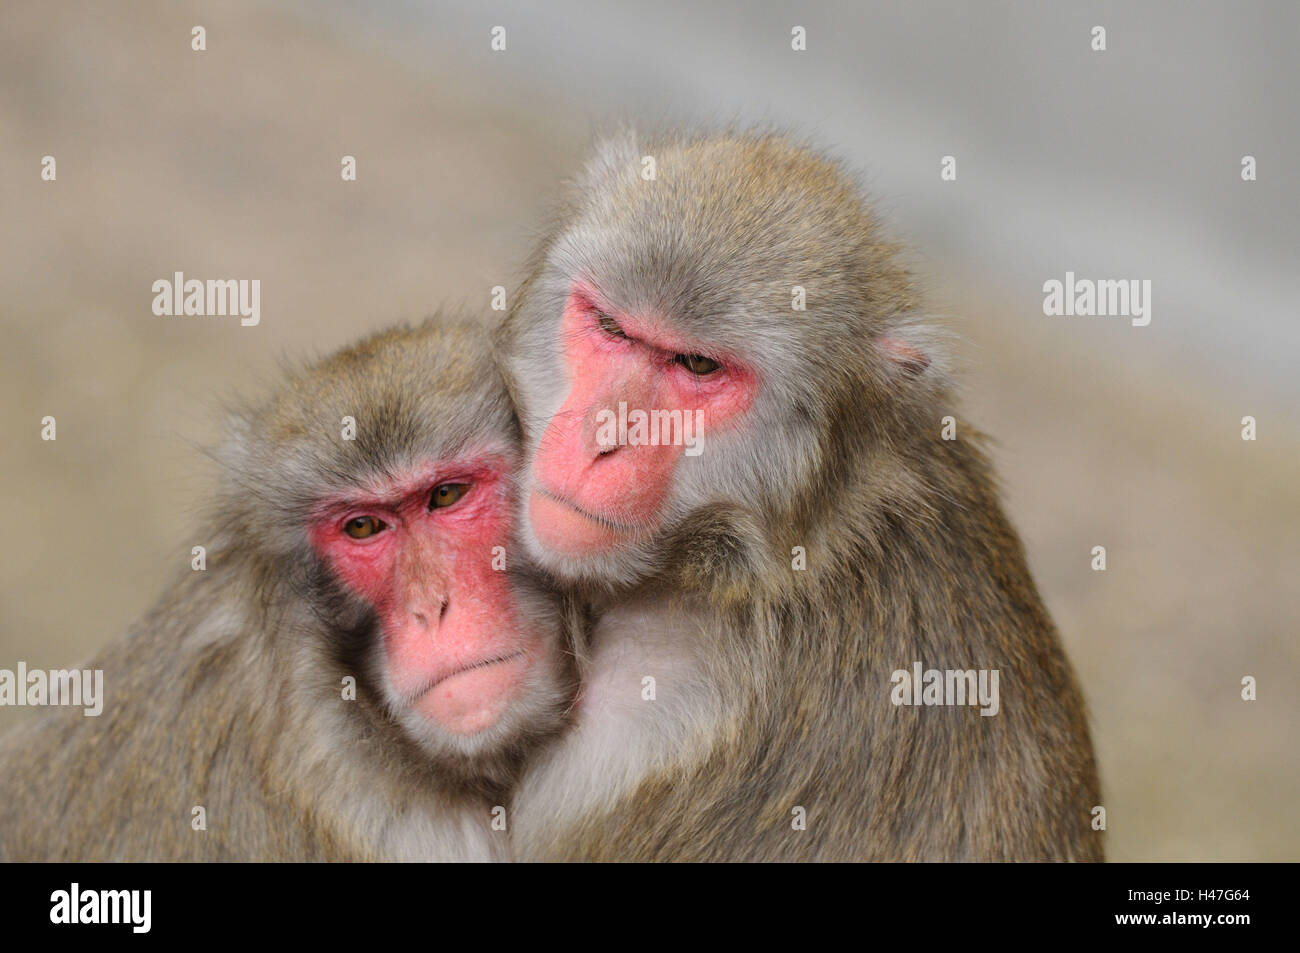 Japanese macaques, Macaca fuscata, half portrait, side view, sitting, cuddling, Looking at camera, focus on the foreground, Stock Photo